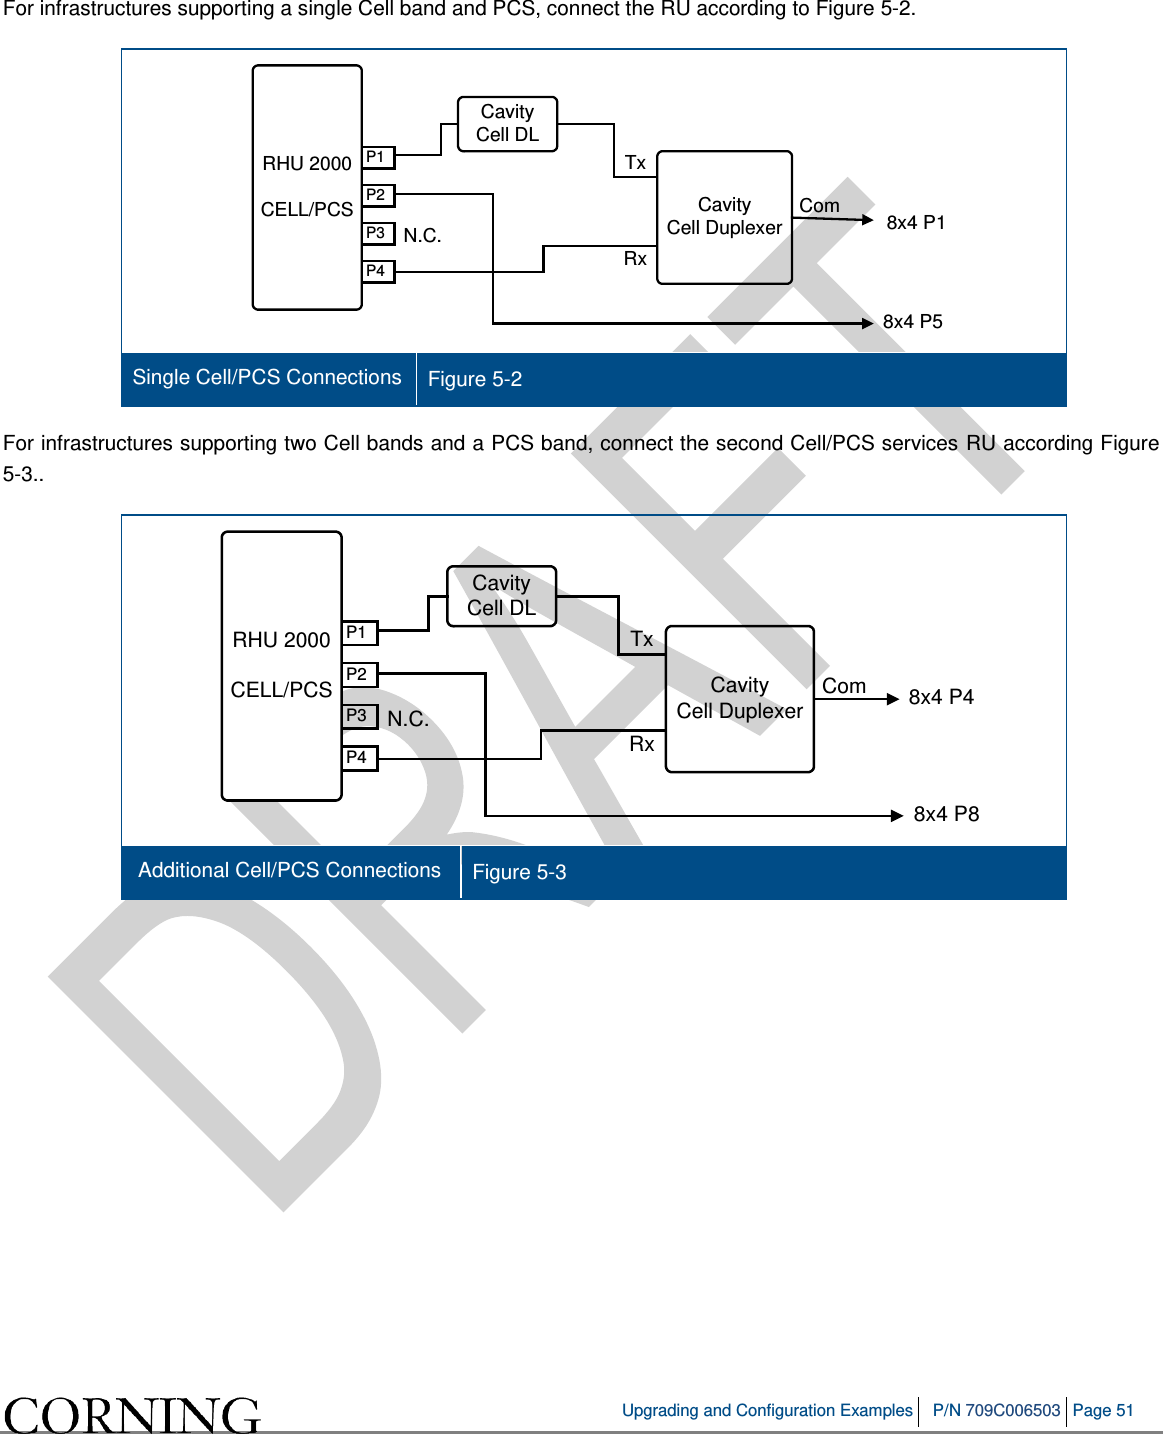   Upgrading and Configuration Examples P/N 709C006503 Page 51   For infrastructures supporting a single Cell band and PCS, connect the RU according to Figure  5-2.  Single Cell/PCS Connections Figure  5-2   For infrastructures supporting two Cell bands and a PCS band, connect the second Cell/PCS services RU according Figure  5-3..   Additional Cell/PCS Connections Figure  5-3      P1P4P3P2RHU 2000CELL/PCS Cavity Cell DuplexerN.C. 8x4 P18x4 P5CavityCell DLTxRxComP1P4P3P2RHU 2000CELL/PCS Cavity Cell DuplexerN.C. 8x4 P48x4 P8CavityCell DLTxRxCom